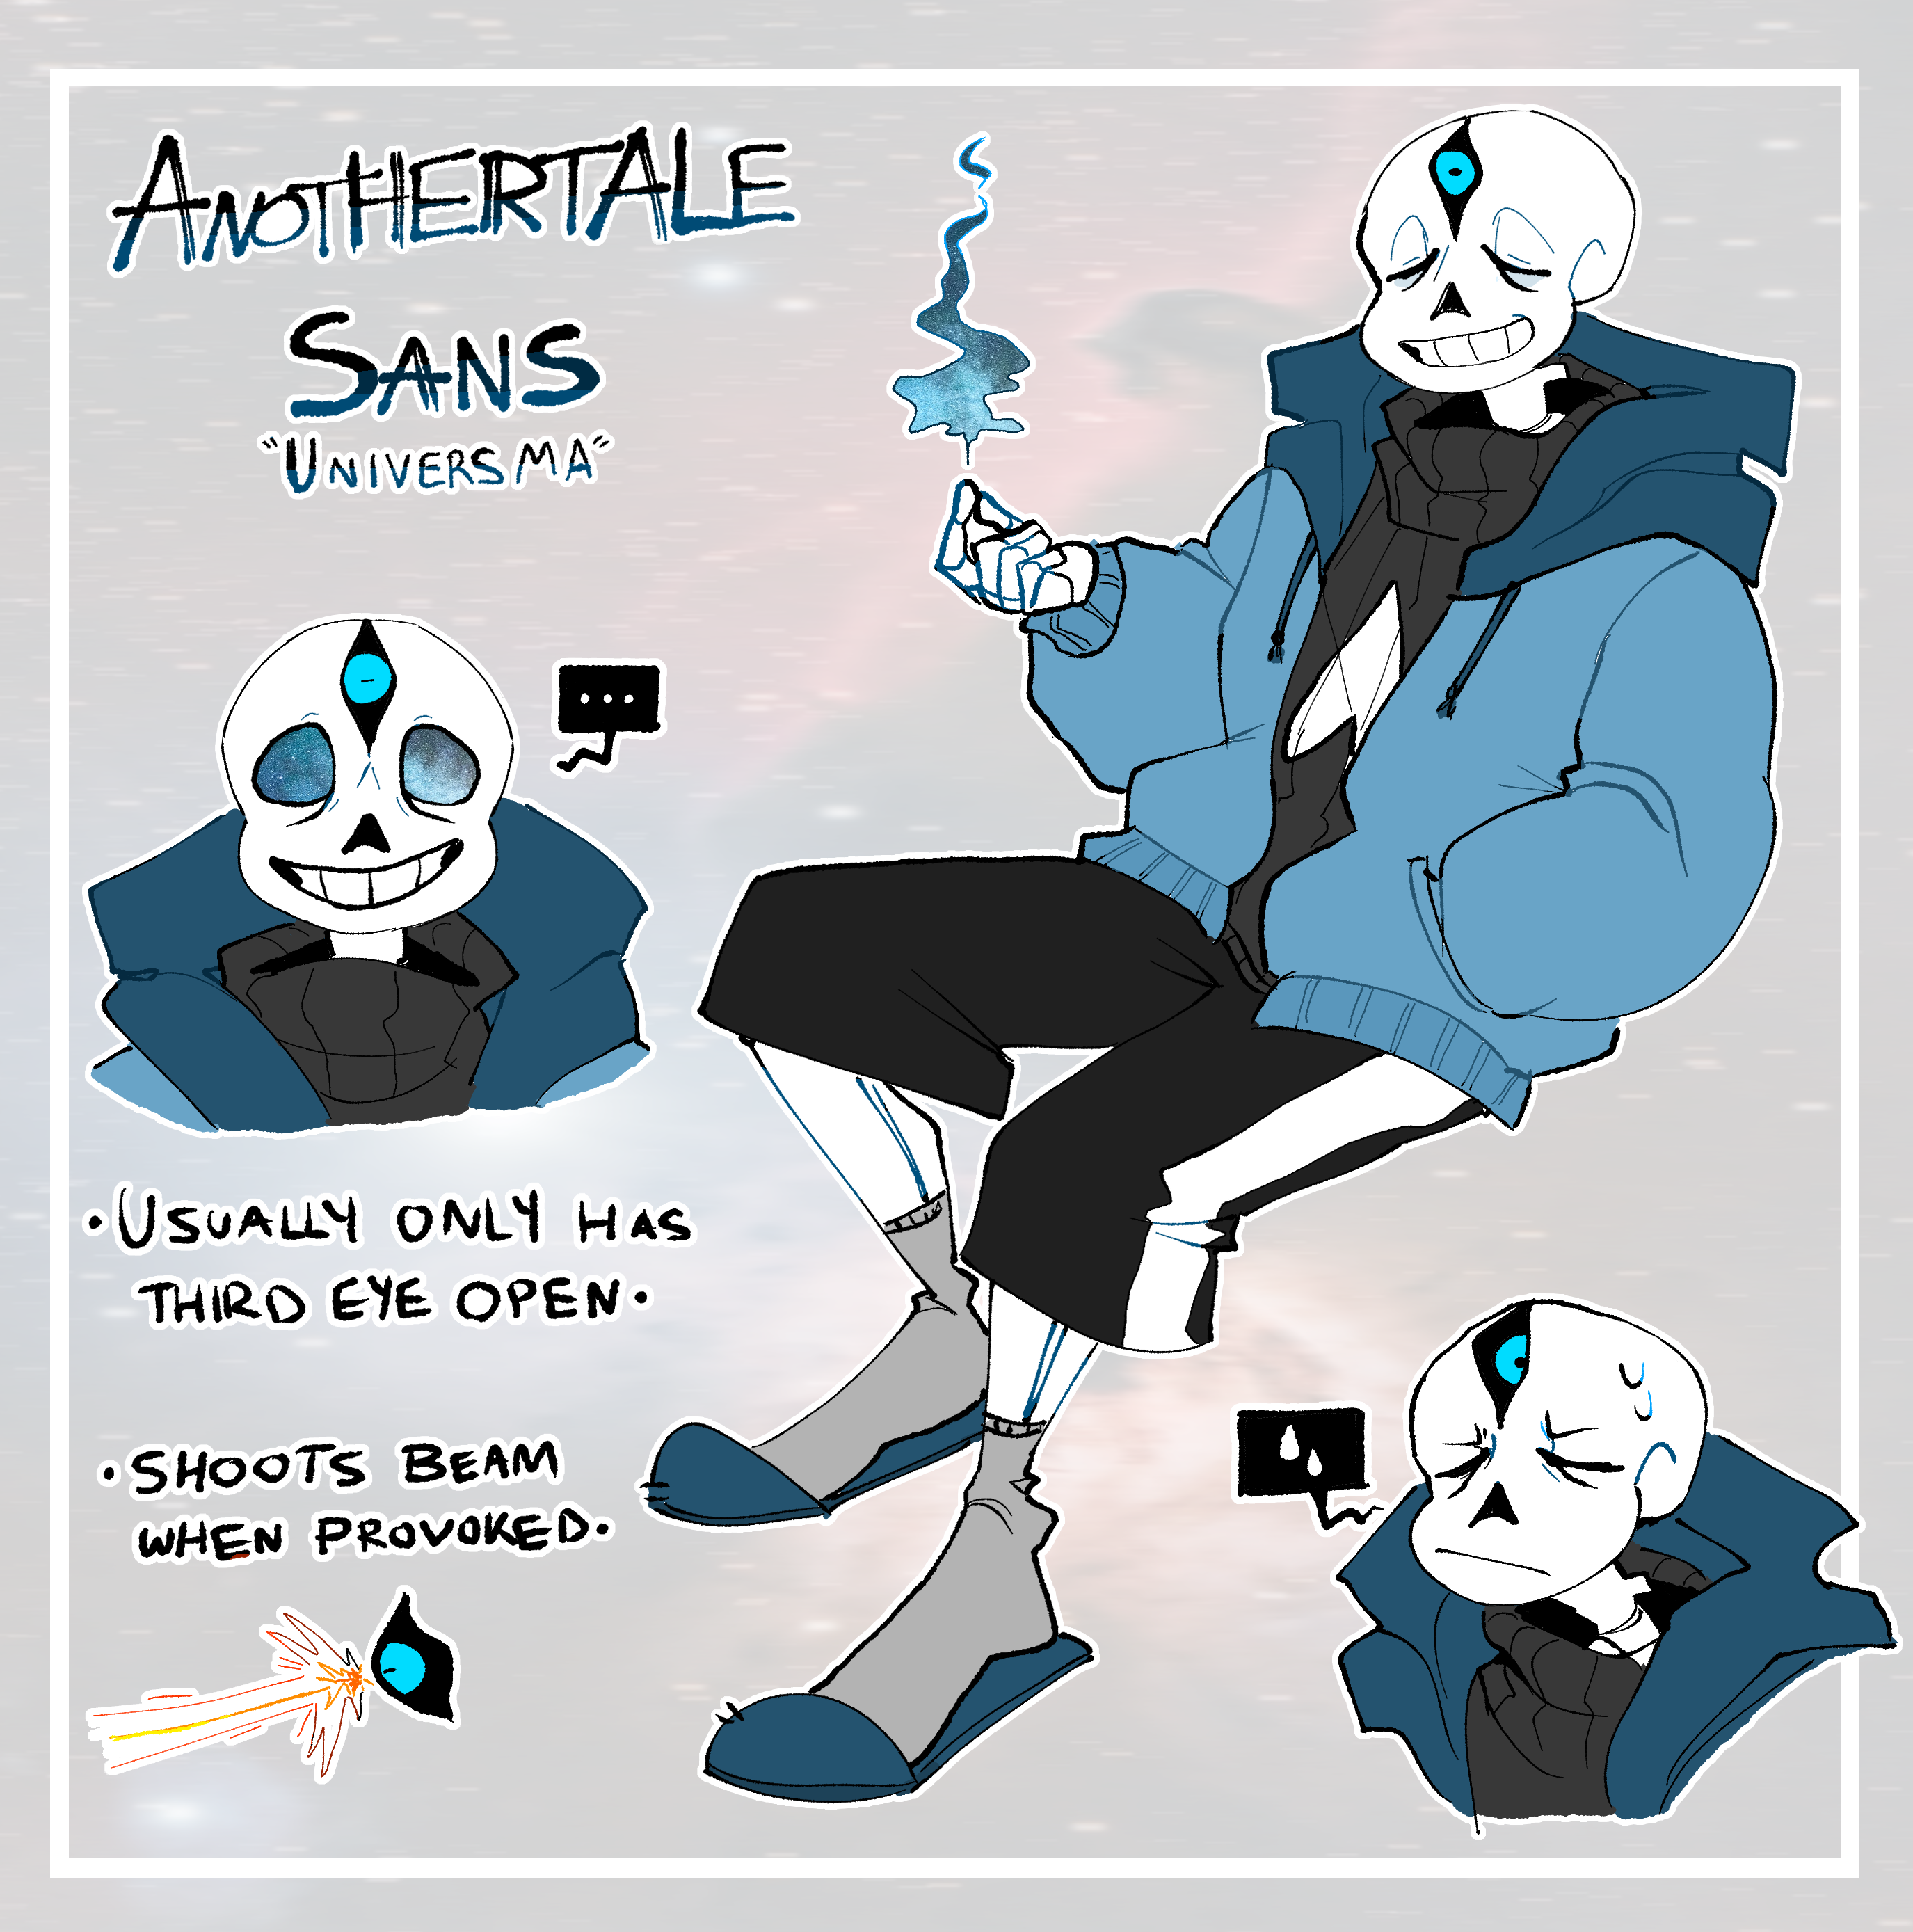 Who is wiki sans? 